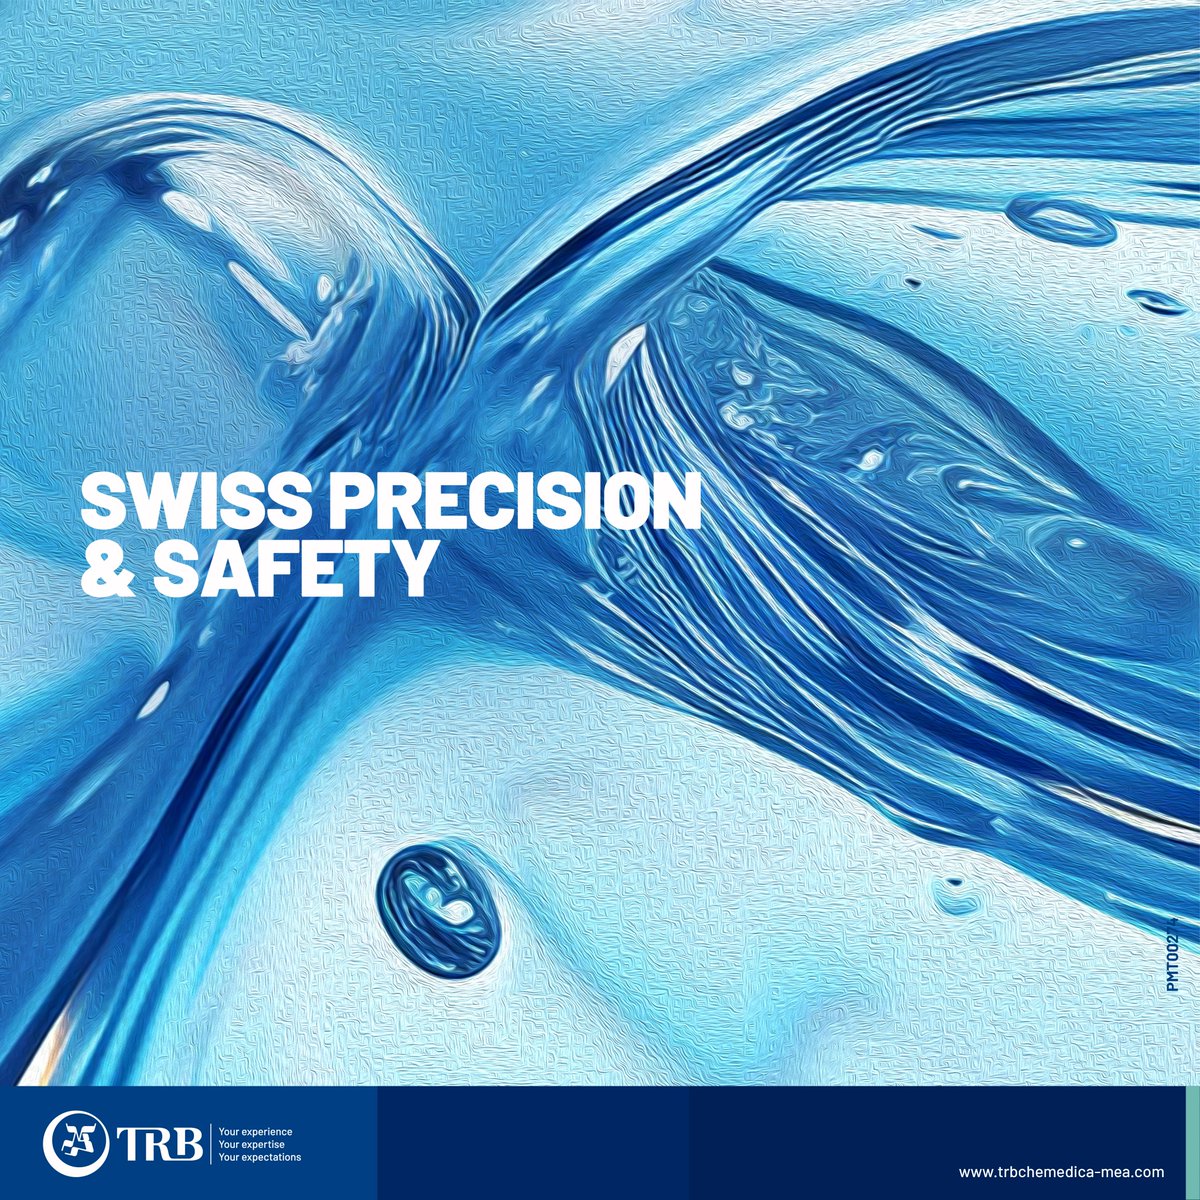 Producing hyaluronic acid products with Swiss precision and safety.
#TRB #TRBCare #WeCare